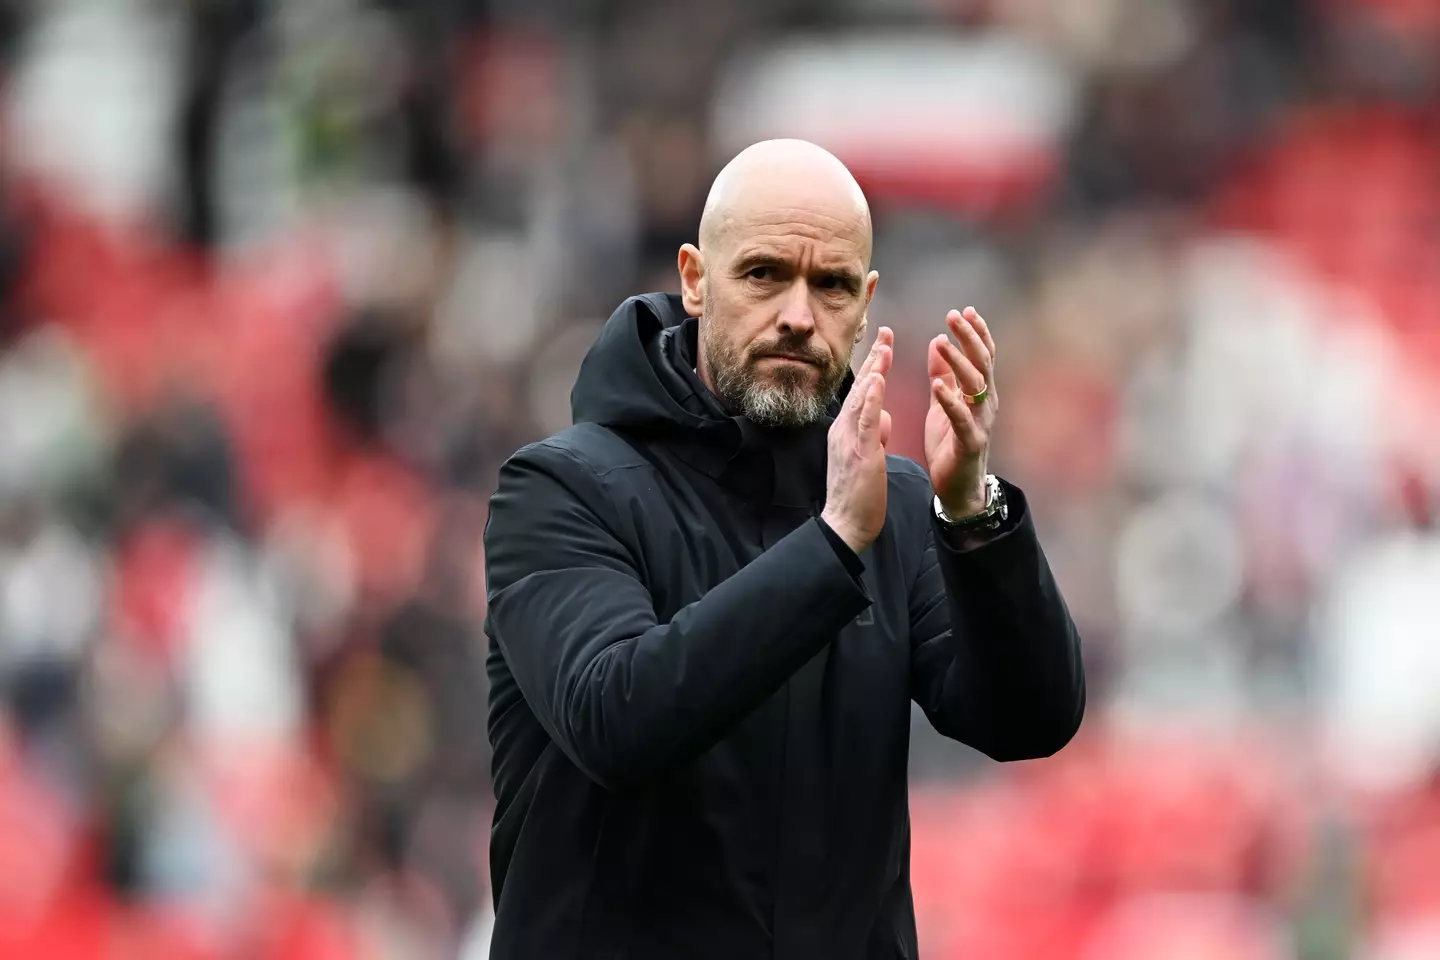 Ten Hag is said to be on Bayern Munich's four-man managerial shortlist (Getty)